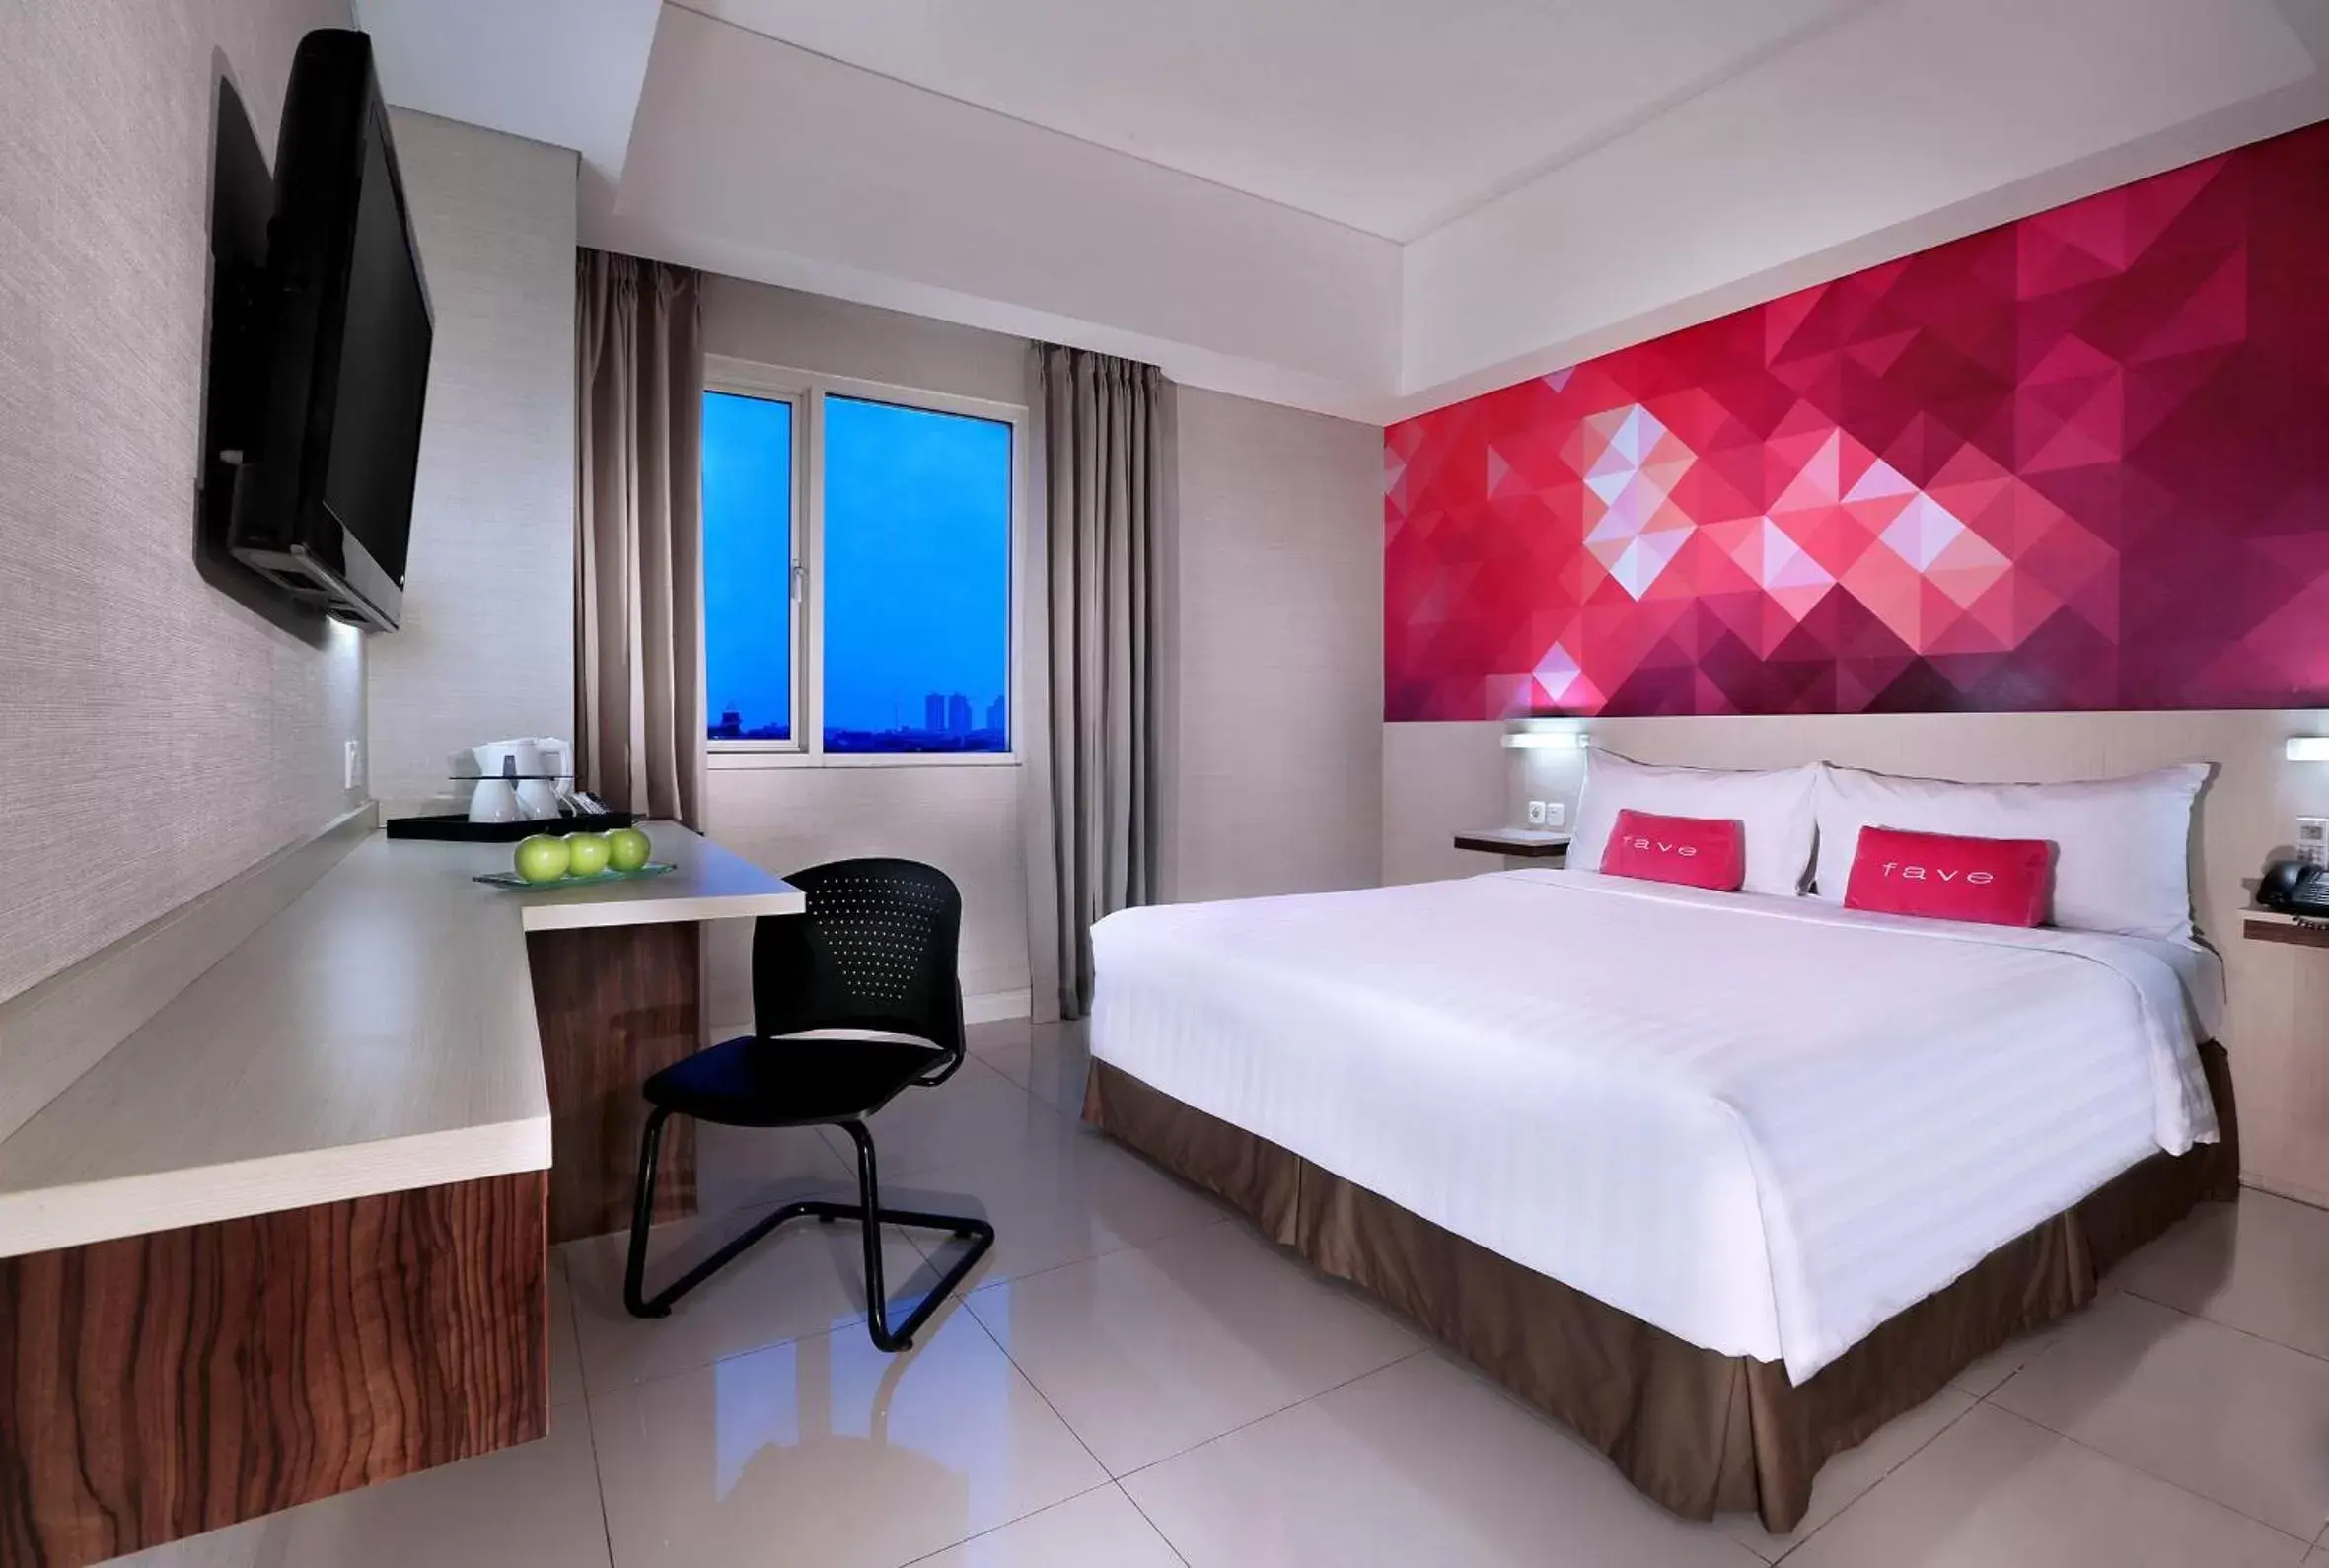 View (from property/room) in favehotel Tanah Abang - Cideng